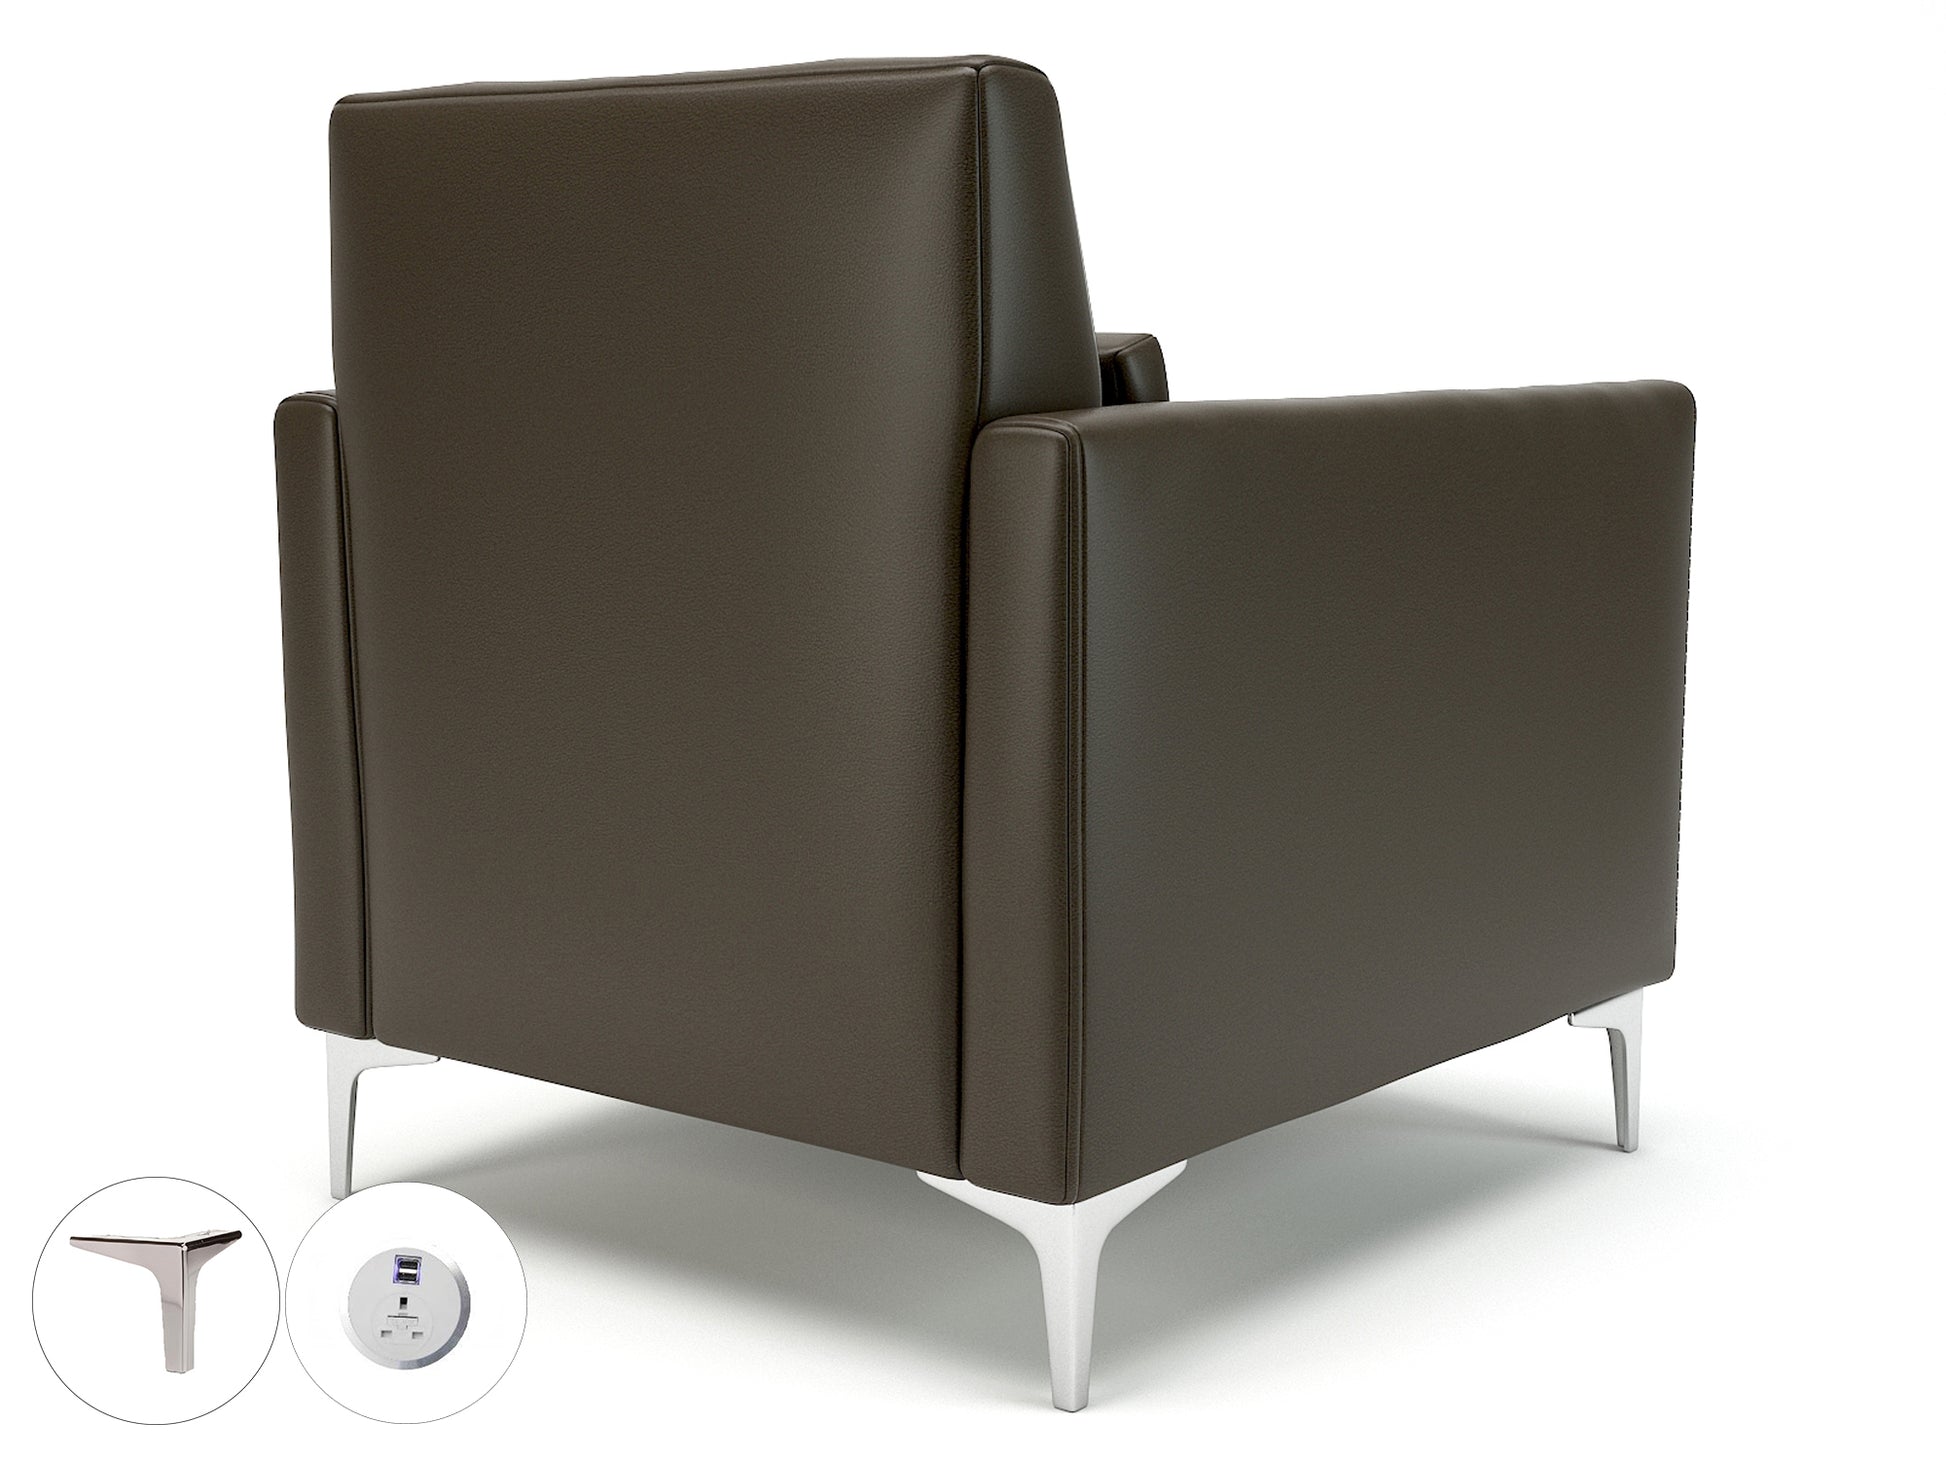 Roselle 90cm Wide Armchair in Cristina Marrone Ultima Faux Leather with Socket